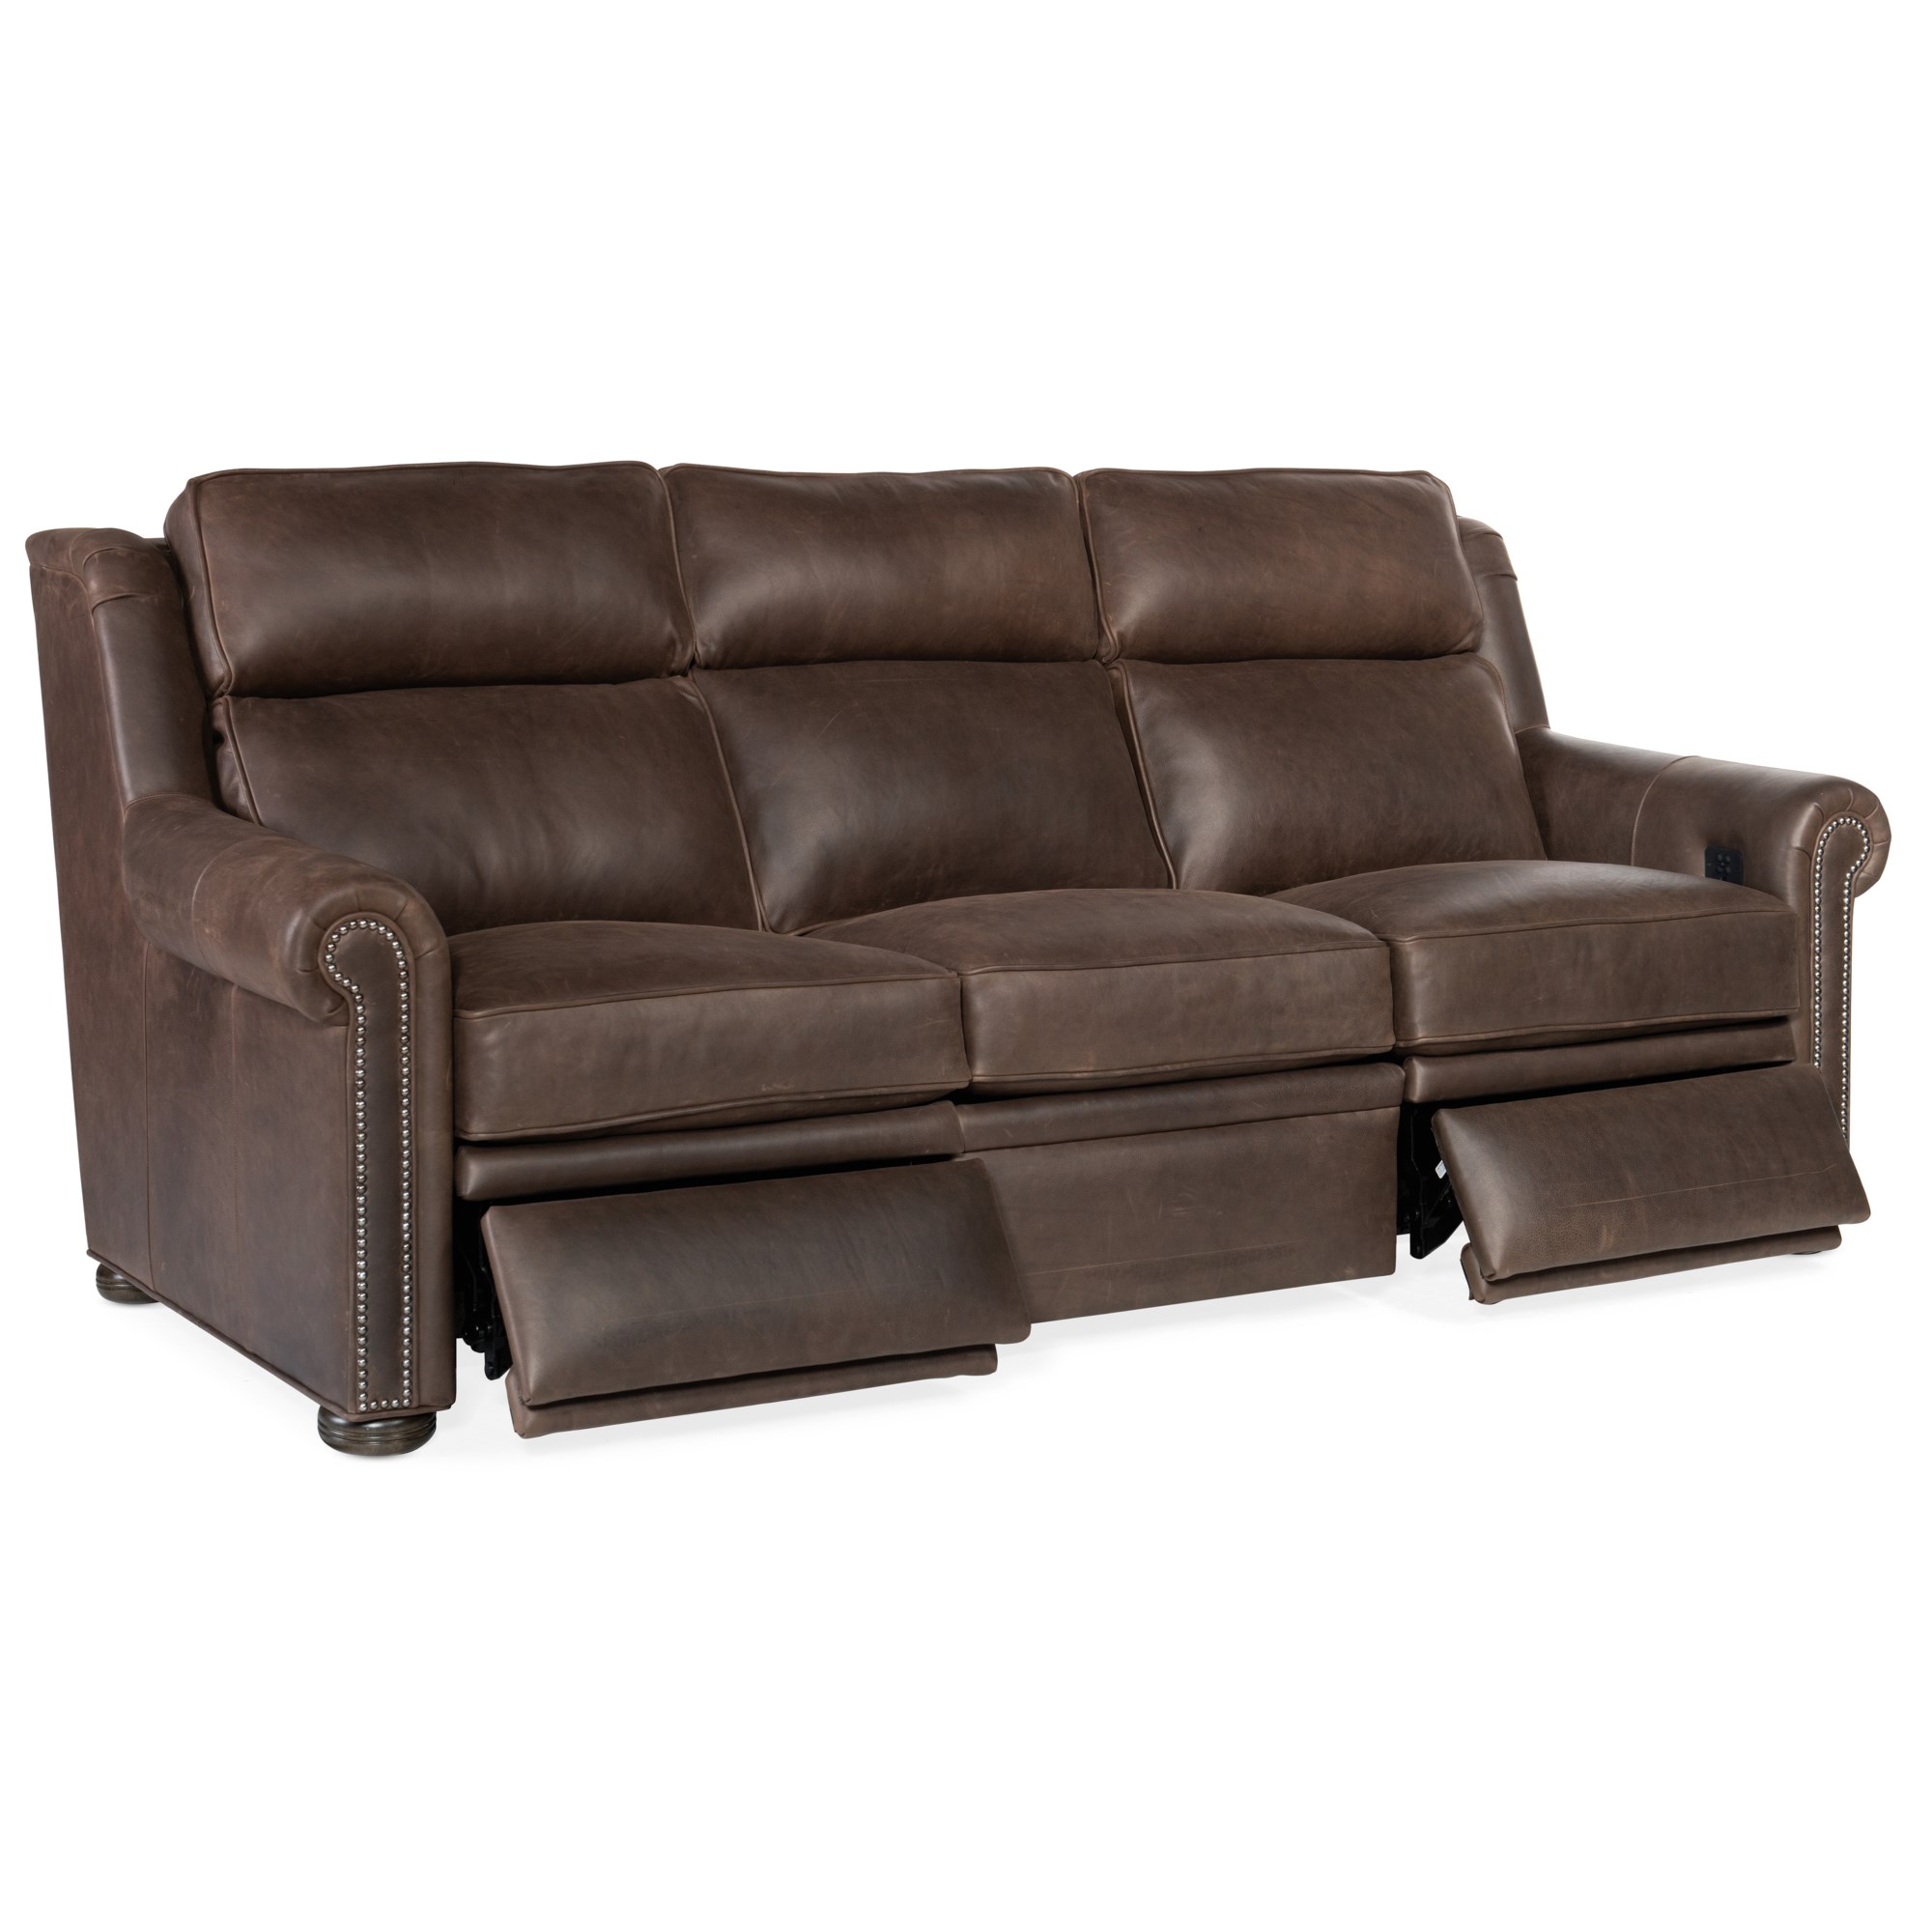 Reclining Furniture Lift Chairs, Marshall's Home Living